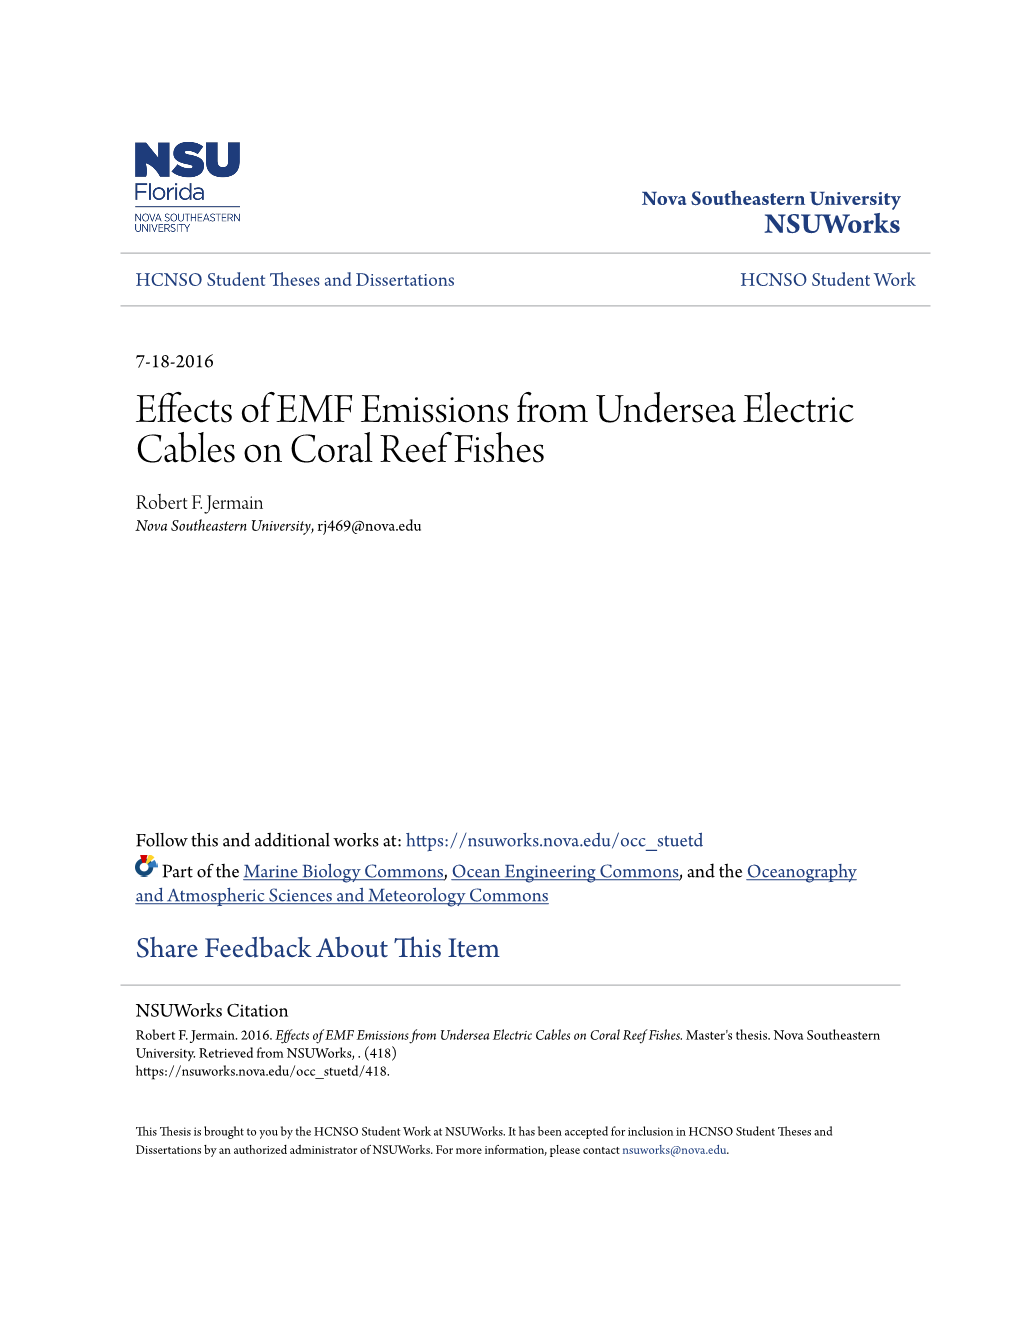 Effects of EMF Emissions from Undersea Electric Cables on Coral Reef Fishes Robert F